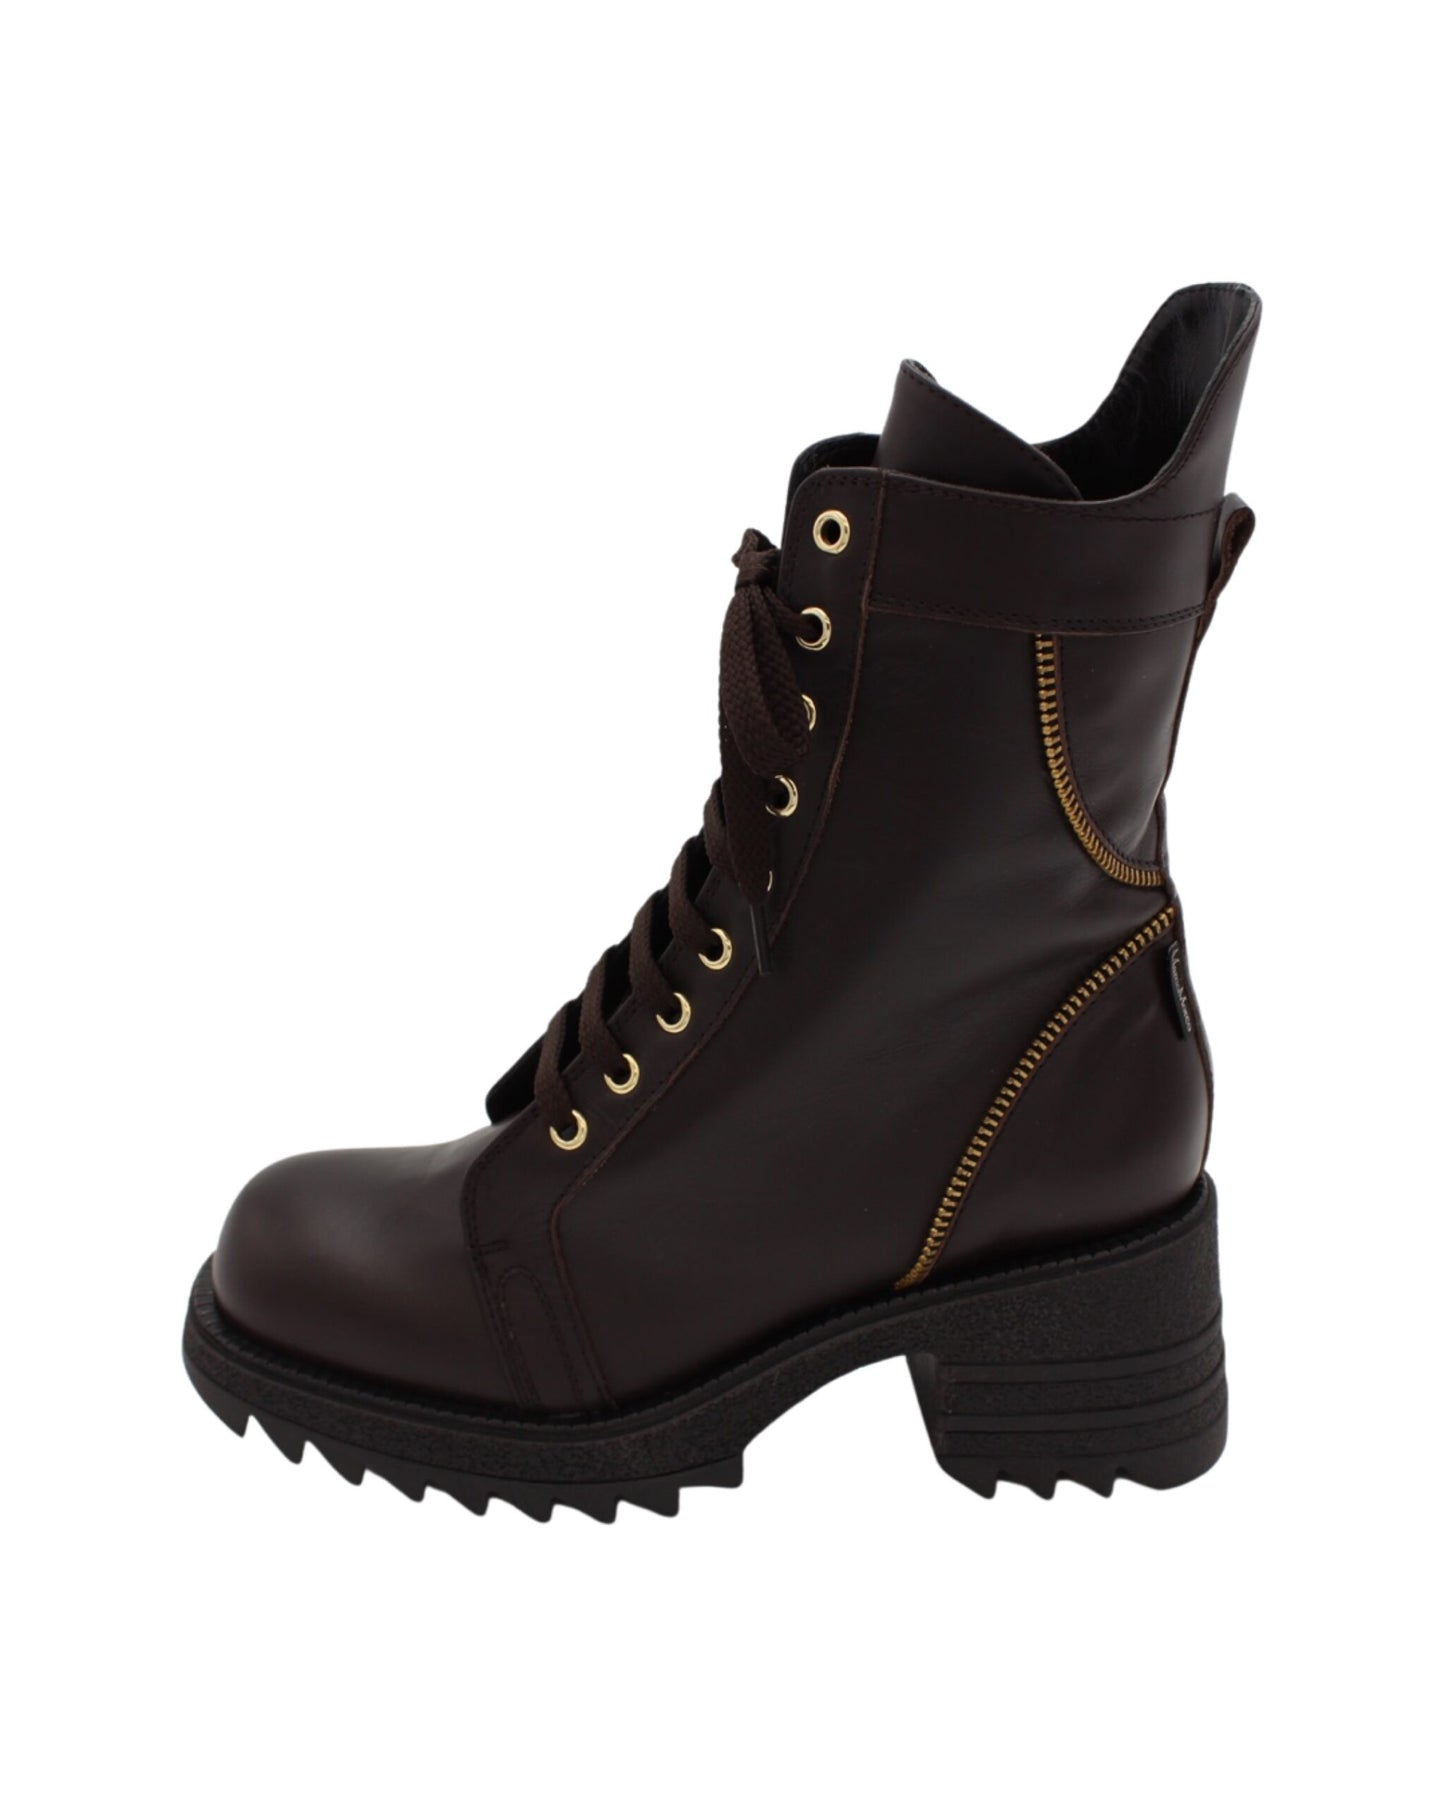 Marco Moreo Ankle Boots  Chocolate